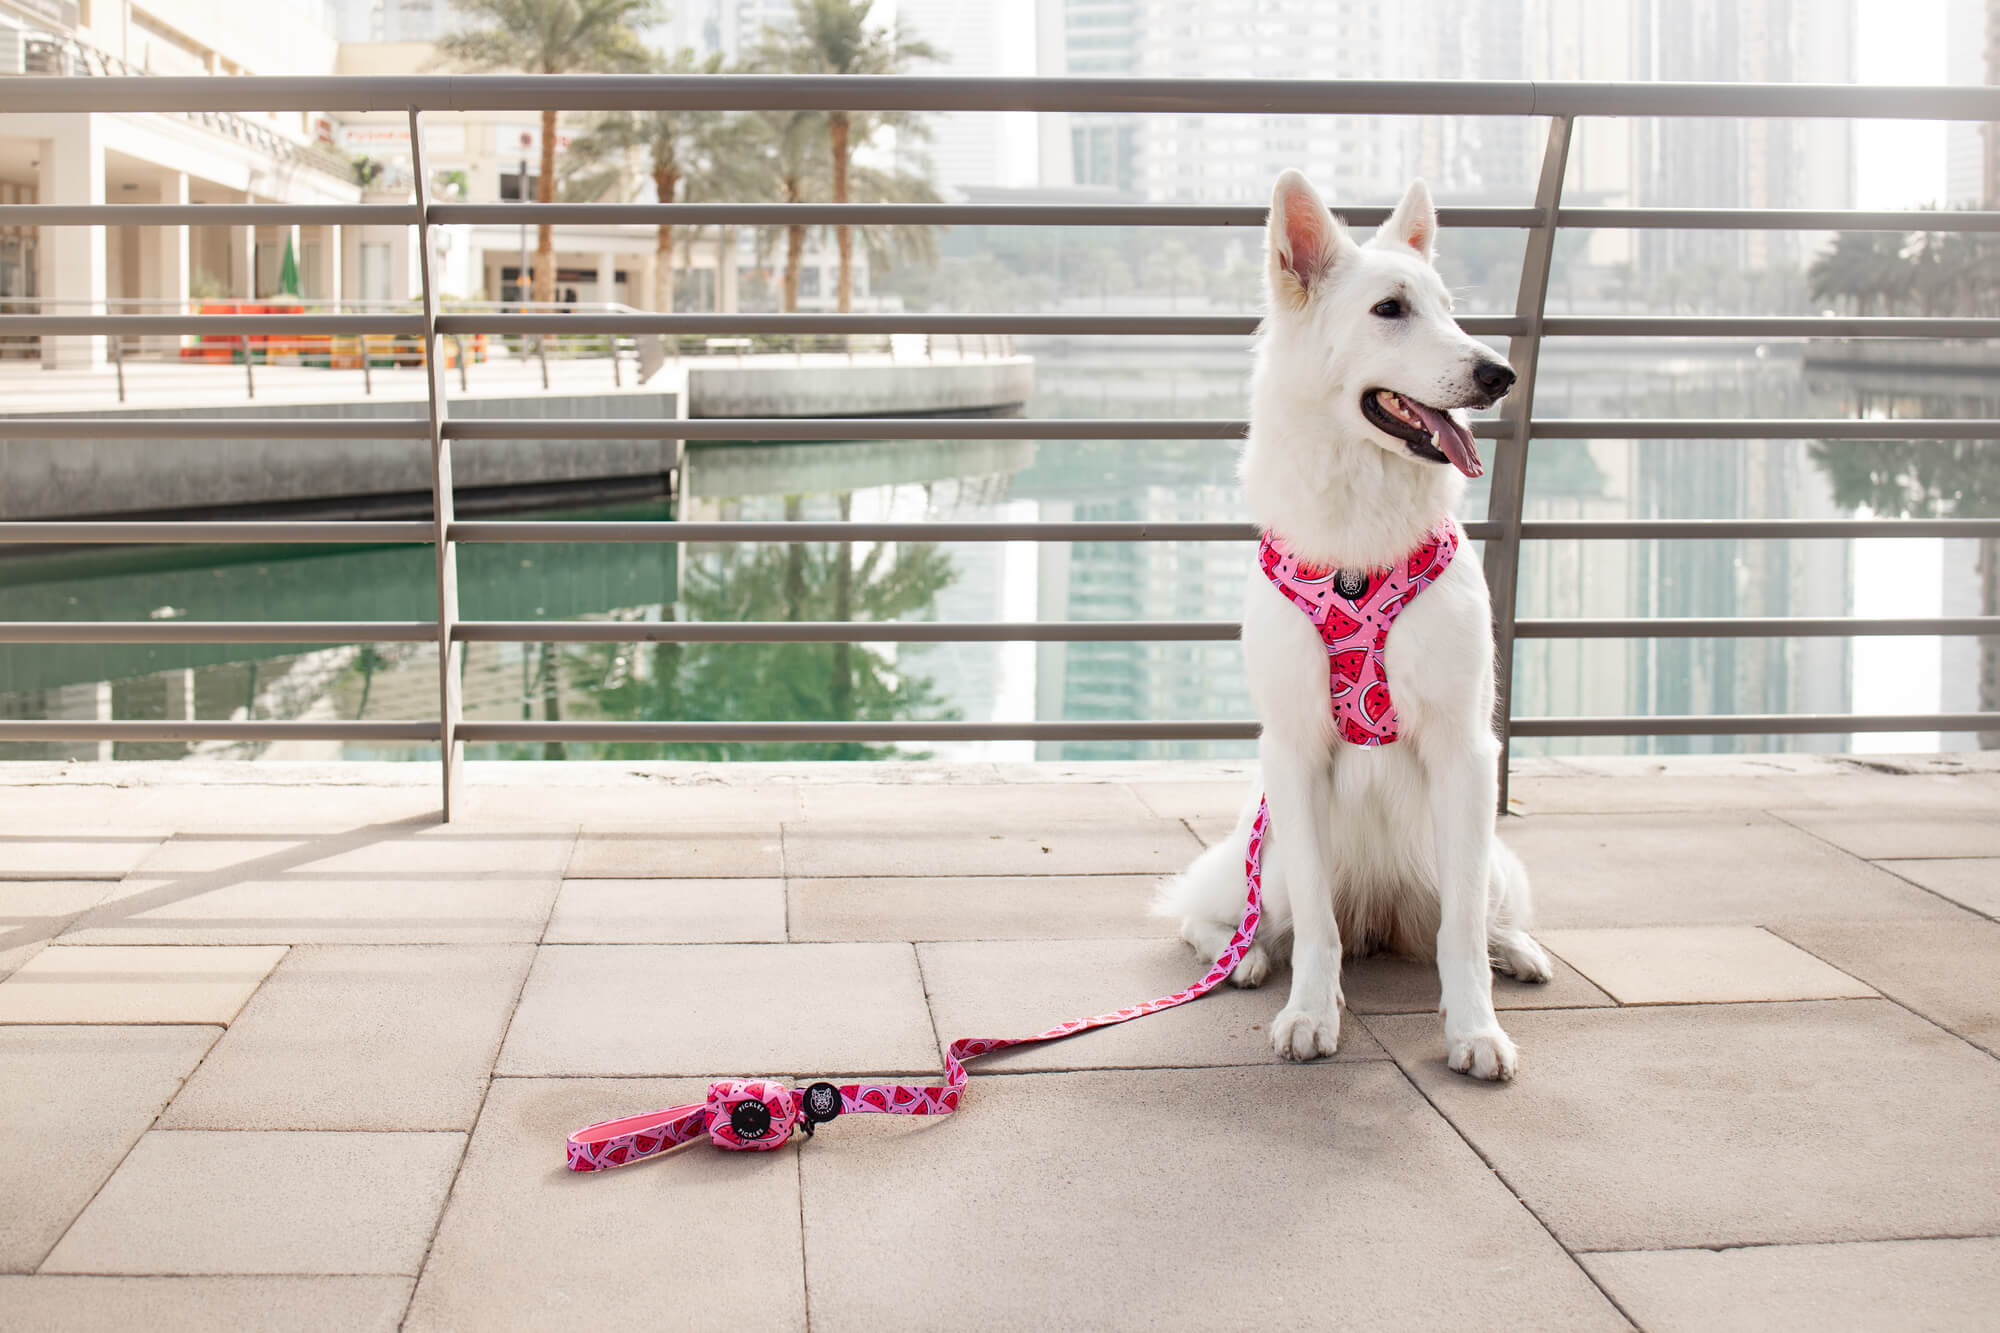 Dubai in Summer - How to Enjoy Outdoors with Your Dog